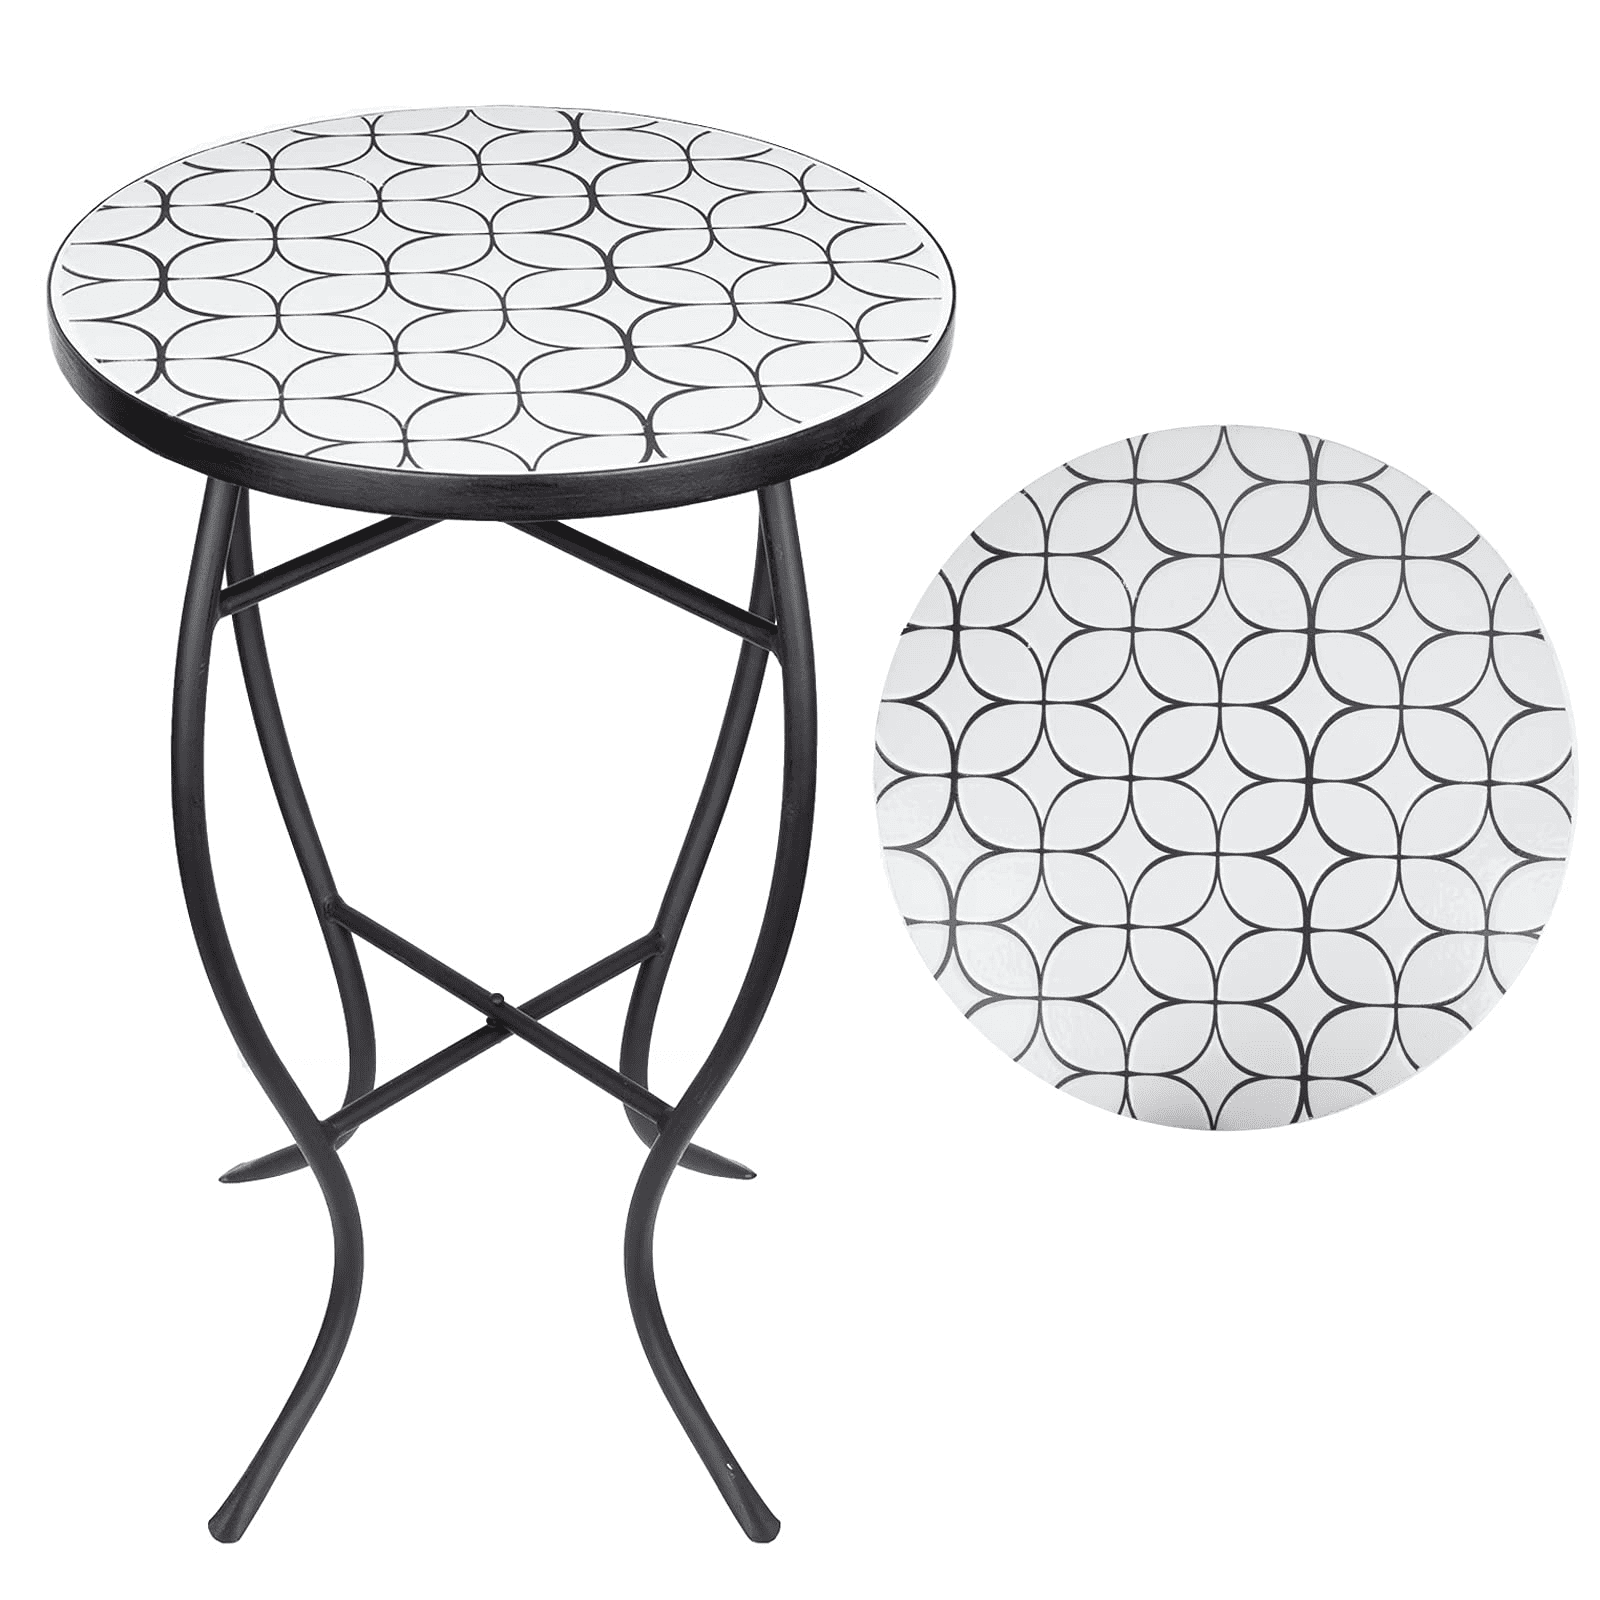 Patio Side Table Coffee Table Tea Table Grey Rattan Outdoor Indoor Square Table Balcony Small End Table